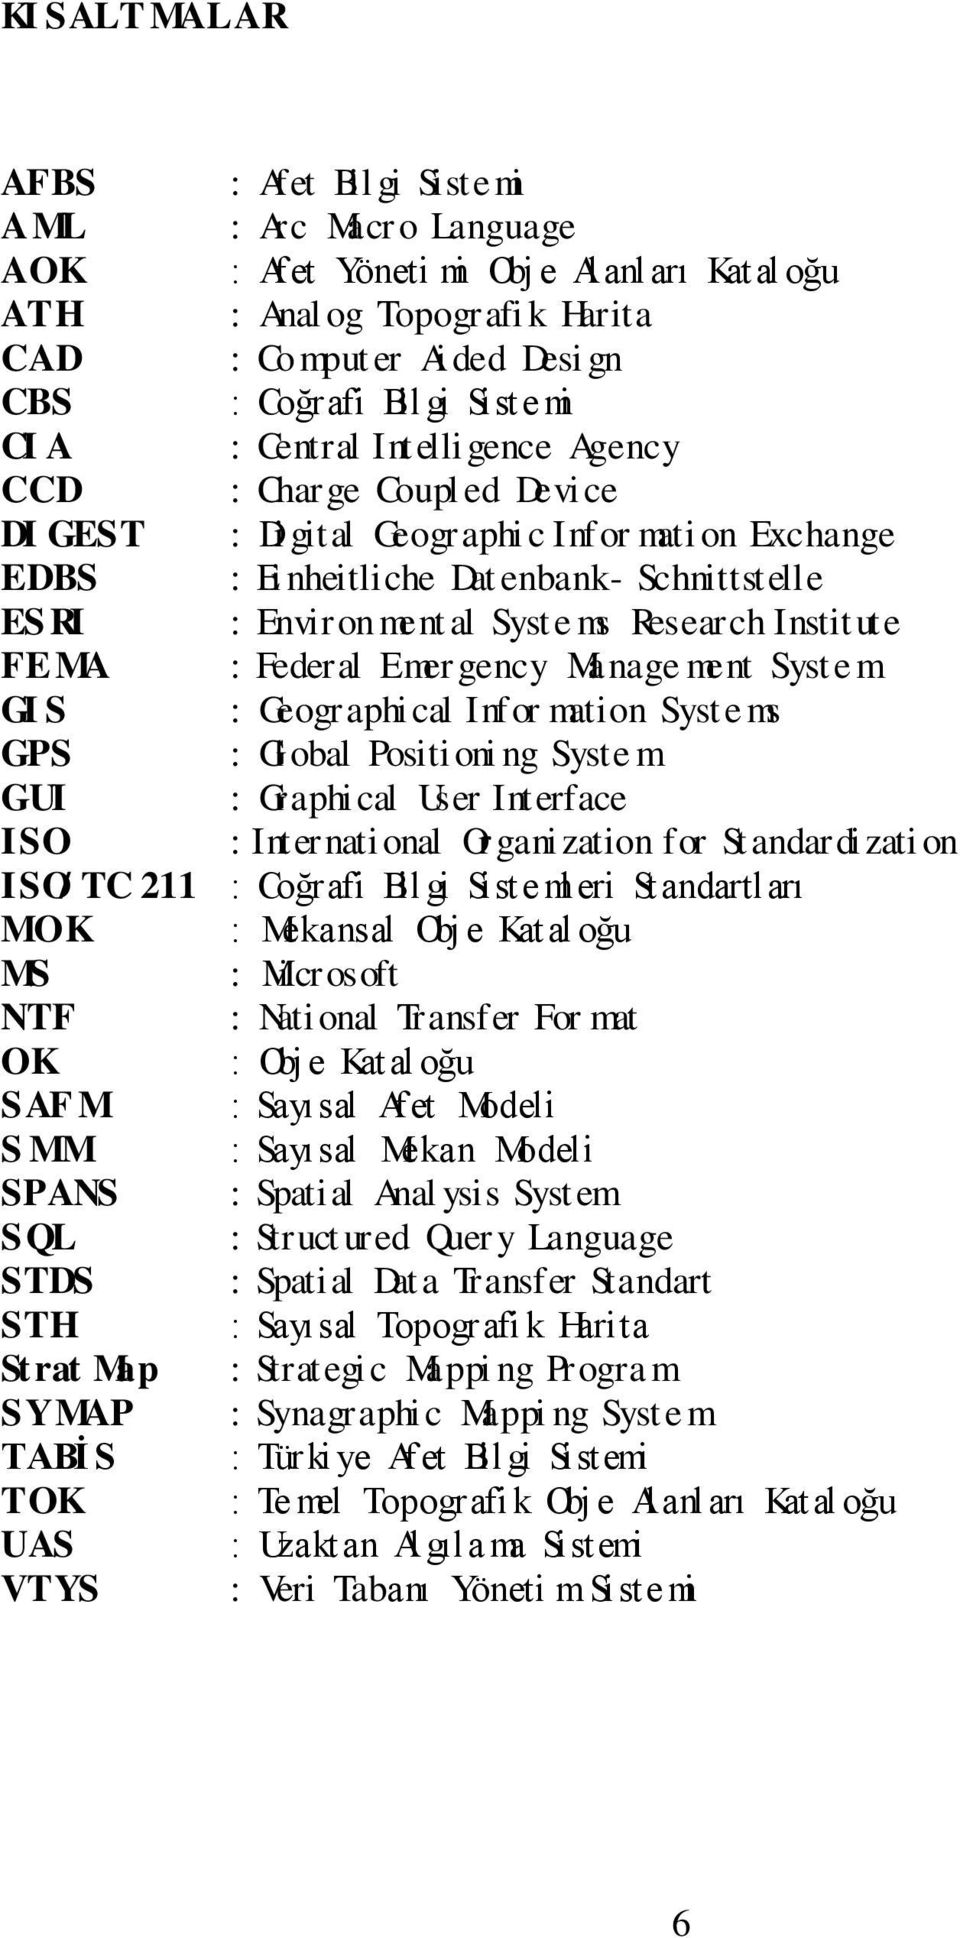 Syste ms Research Institute FEMA : Federal Emer gency Manage ment Syste m GI S : Geographi cal Infor mation Syste ms GPS : Gl obal Positioni ng Syste m GUI : Graphi cal User Interface ISO : Internati